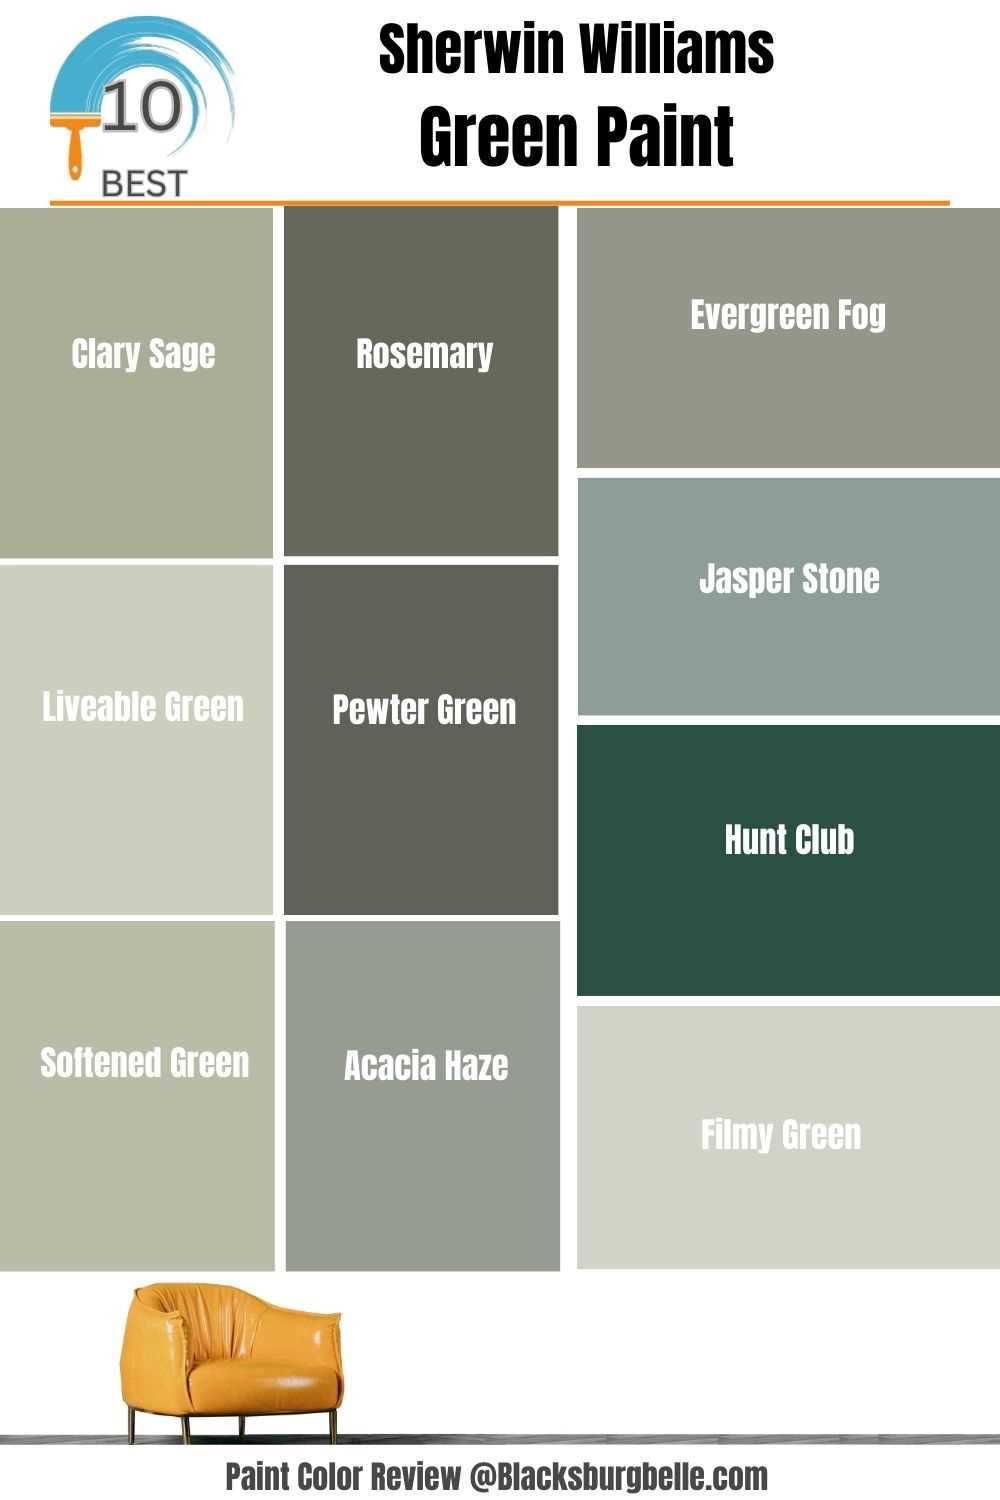 Where to Buy Green Black Sherwin Williams Paint